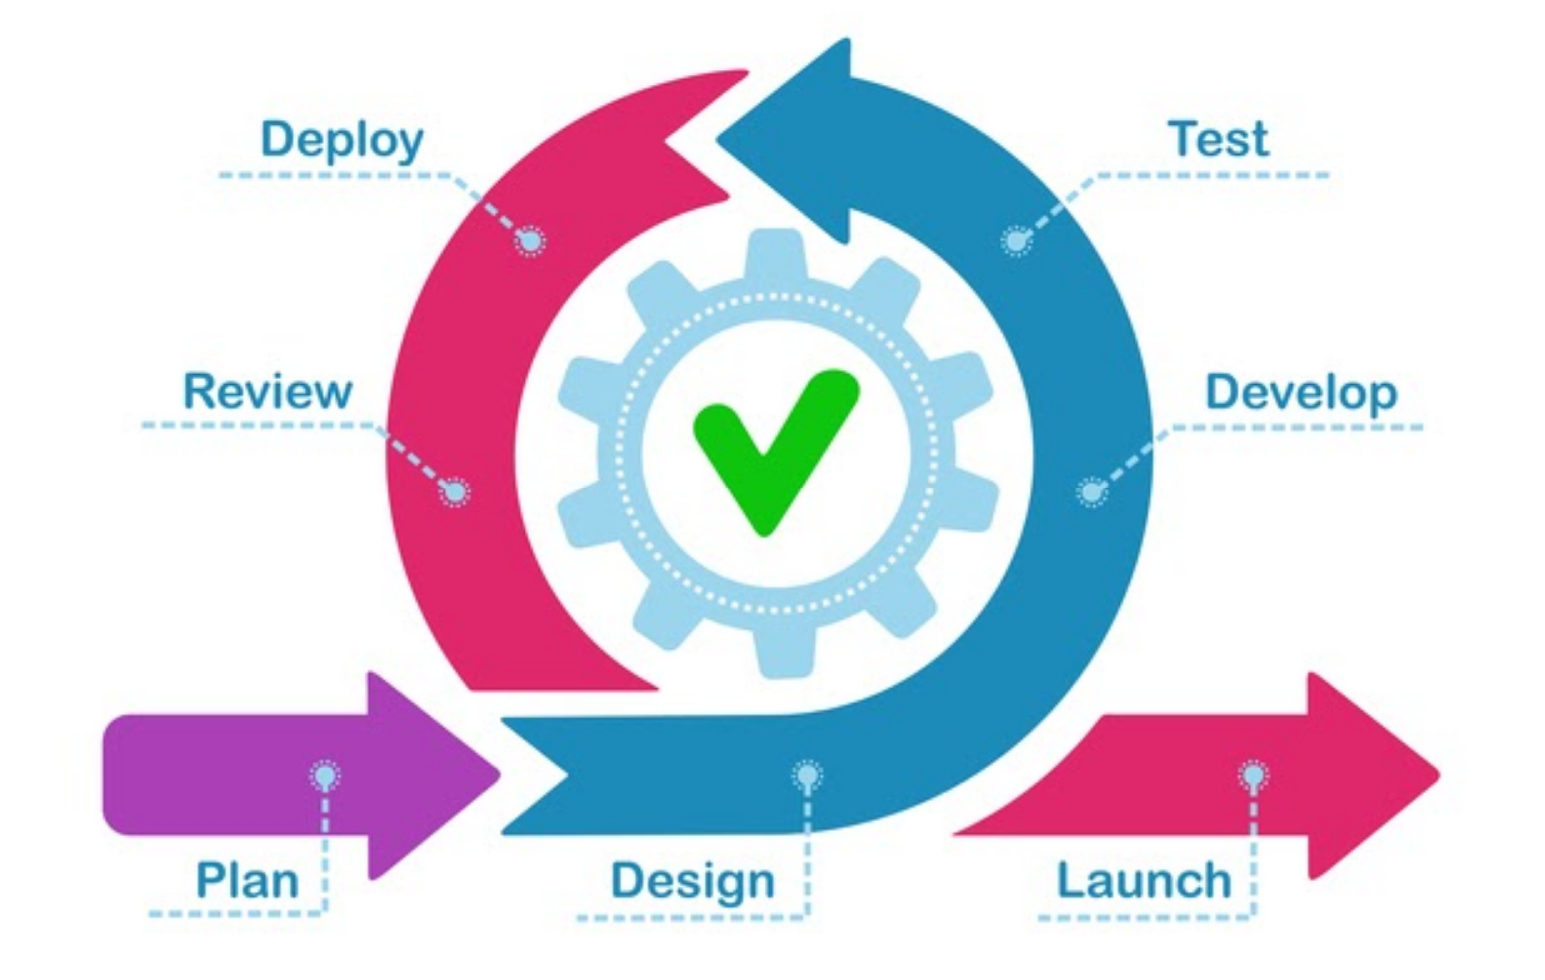 An image depicting a circular, cyclic software development process, using arrows that flow clockwise and a central gear icon. The outer cycle consists of six arrows in varying colors representing different phases: &#39;Plan&#39; (purple), &#39;Design&#39; (blue), &#39;Develop&#39; (light blue), &#39;Test&#39; (blue), &#39;Deploy&#39; (pink), and &#39;Review&#39; (red). Each arrow points to the next, illustrating the continuous nature of the process. The gear at the center has a checkmark, possibly indicating the successful completion of the cycle or the ongoing work. &#39;Launch&#39; is written on a standalone purple arrow that breaks out from the &#39;Review&#39; phase, emphasizing the progression to product launch. The design suggests a dynamic and iterative approach to software development, with a focus on regular reviews and improvements